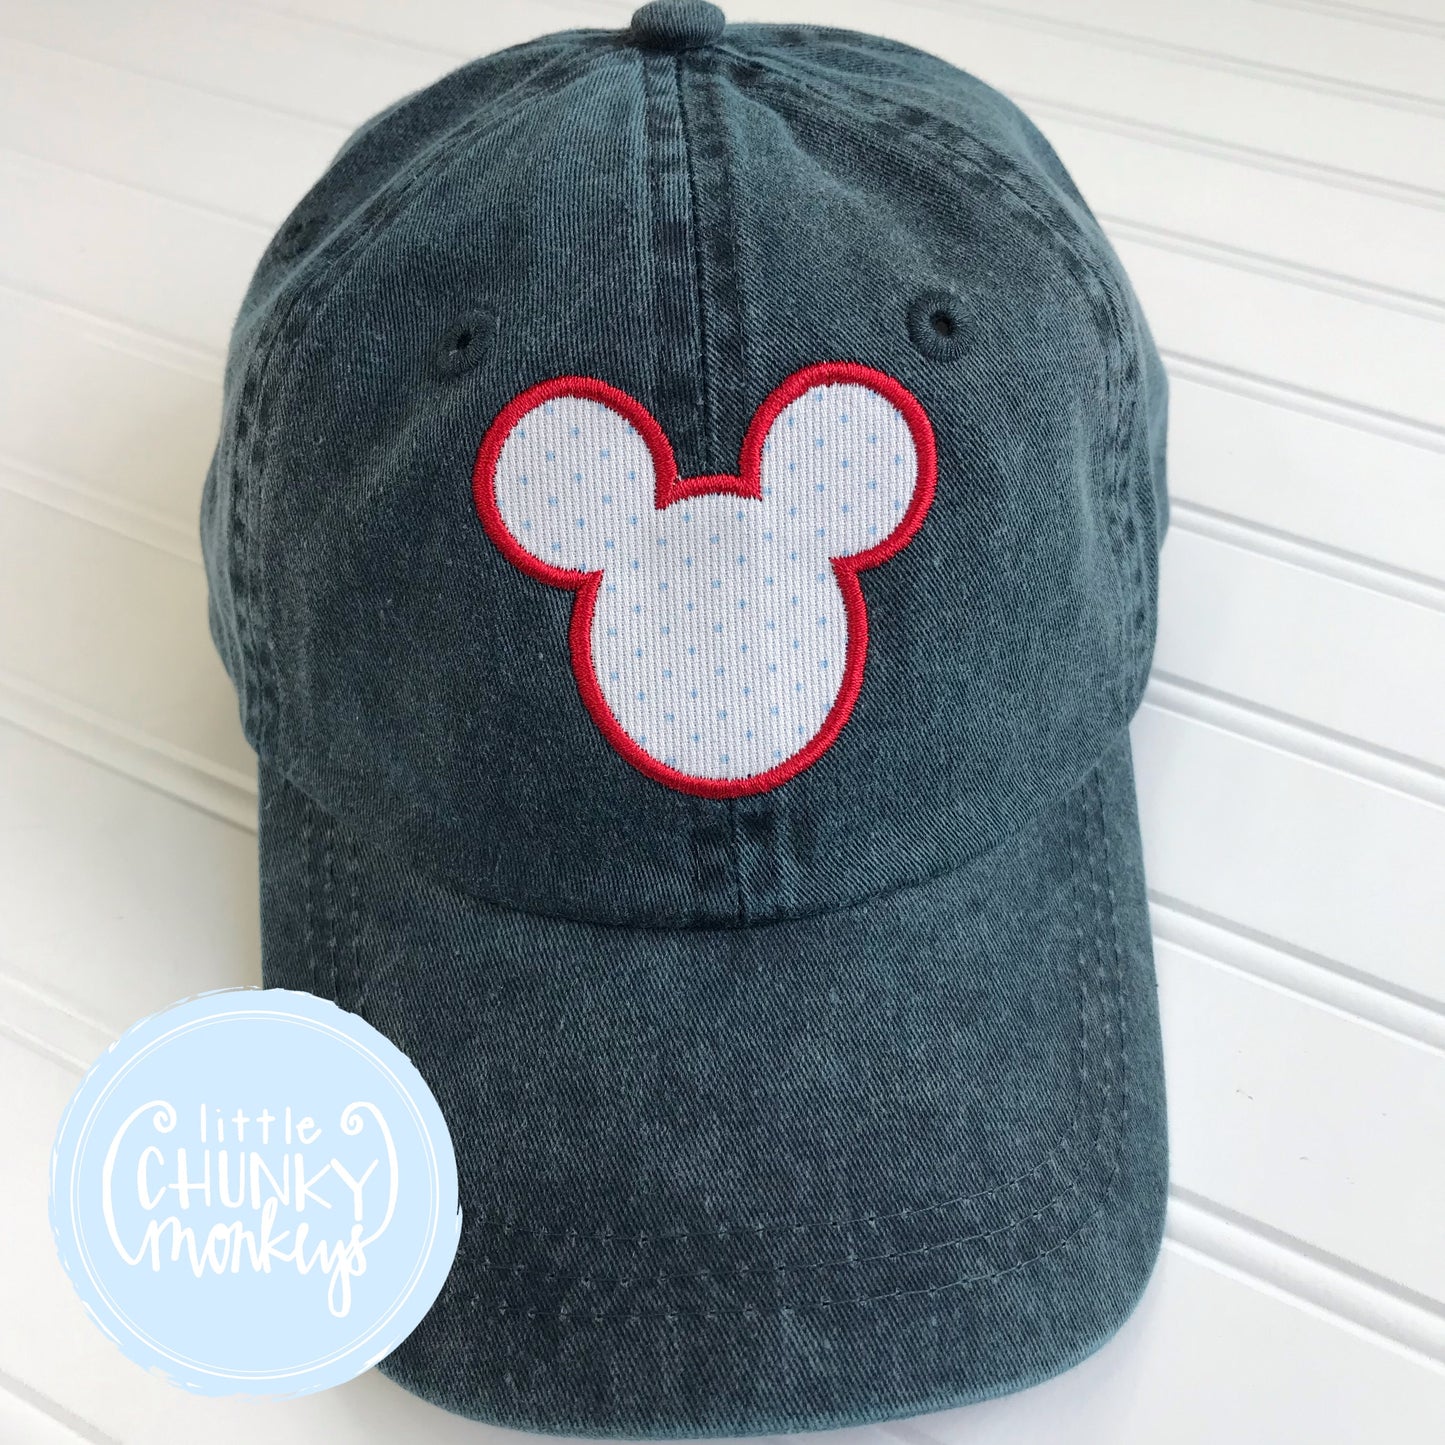 Toddler Kid Hat - Bitty Dot Mouse on Navy Hat